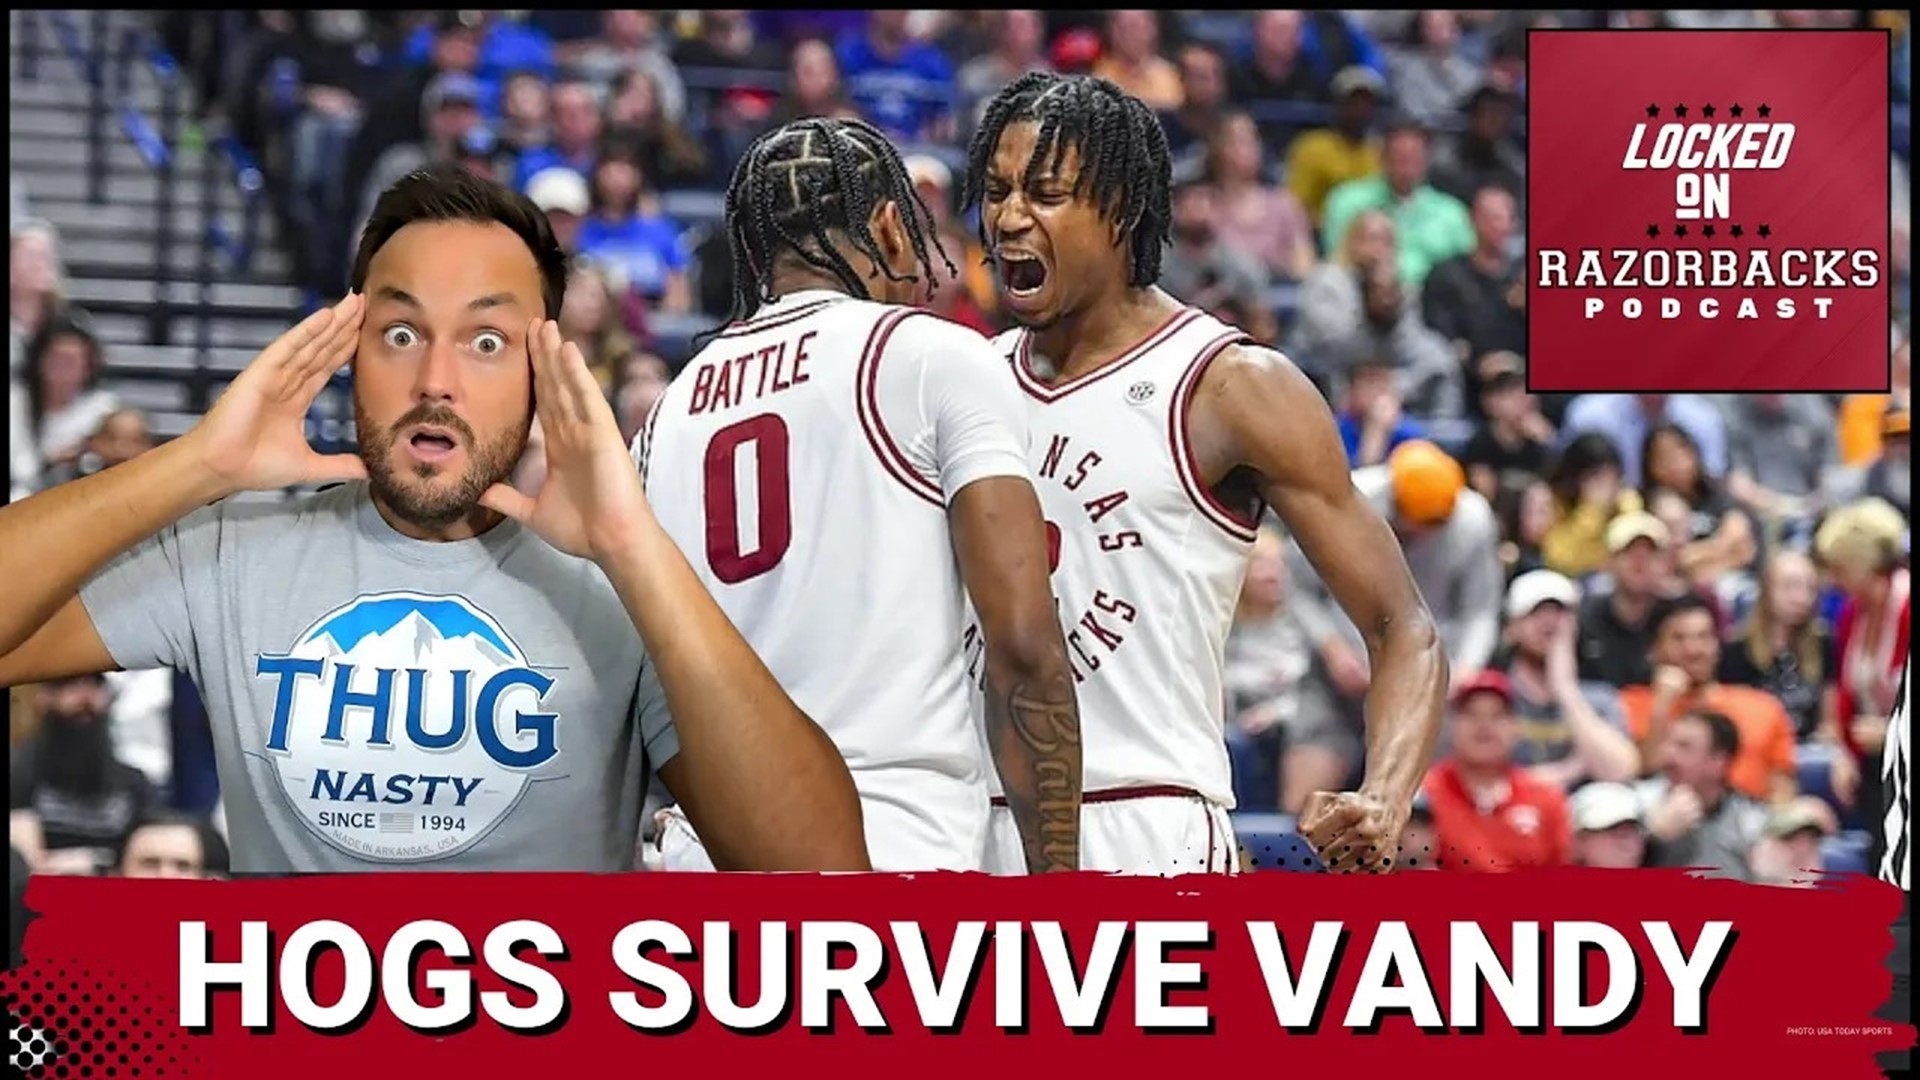 Arkansas was able to win a ridiculous game over Vandy in the 1st matchup of the SEC Tournament. Can they keep it going?